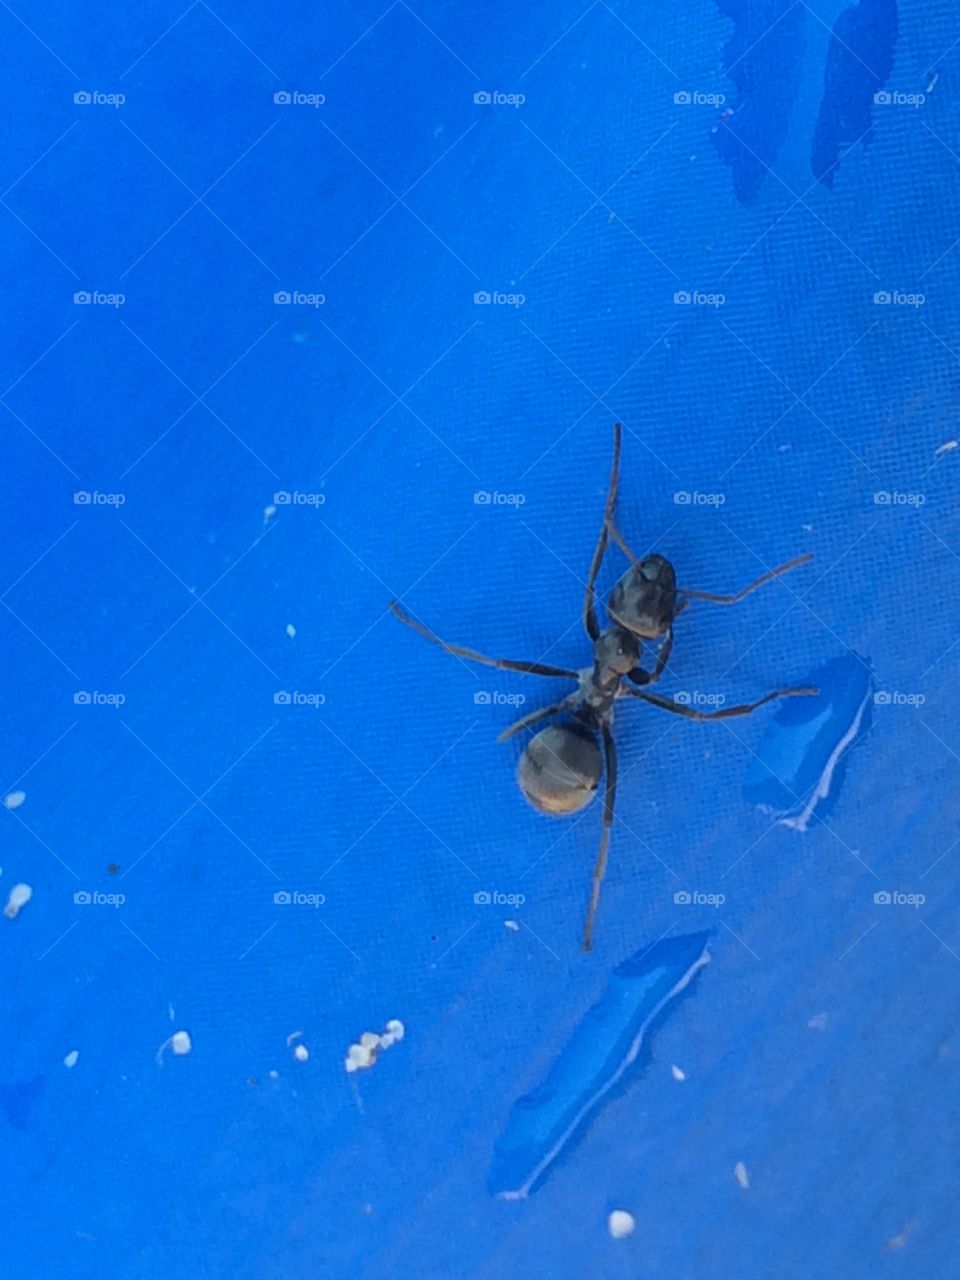 A big black ant busy at work on our pool 